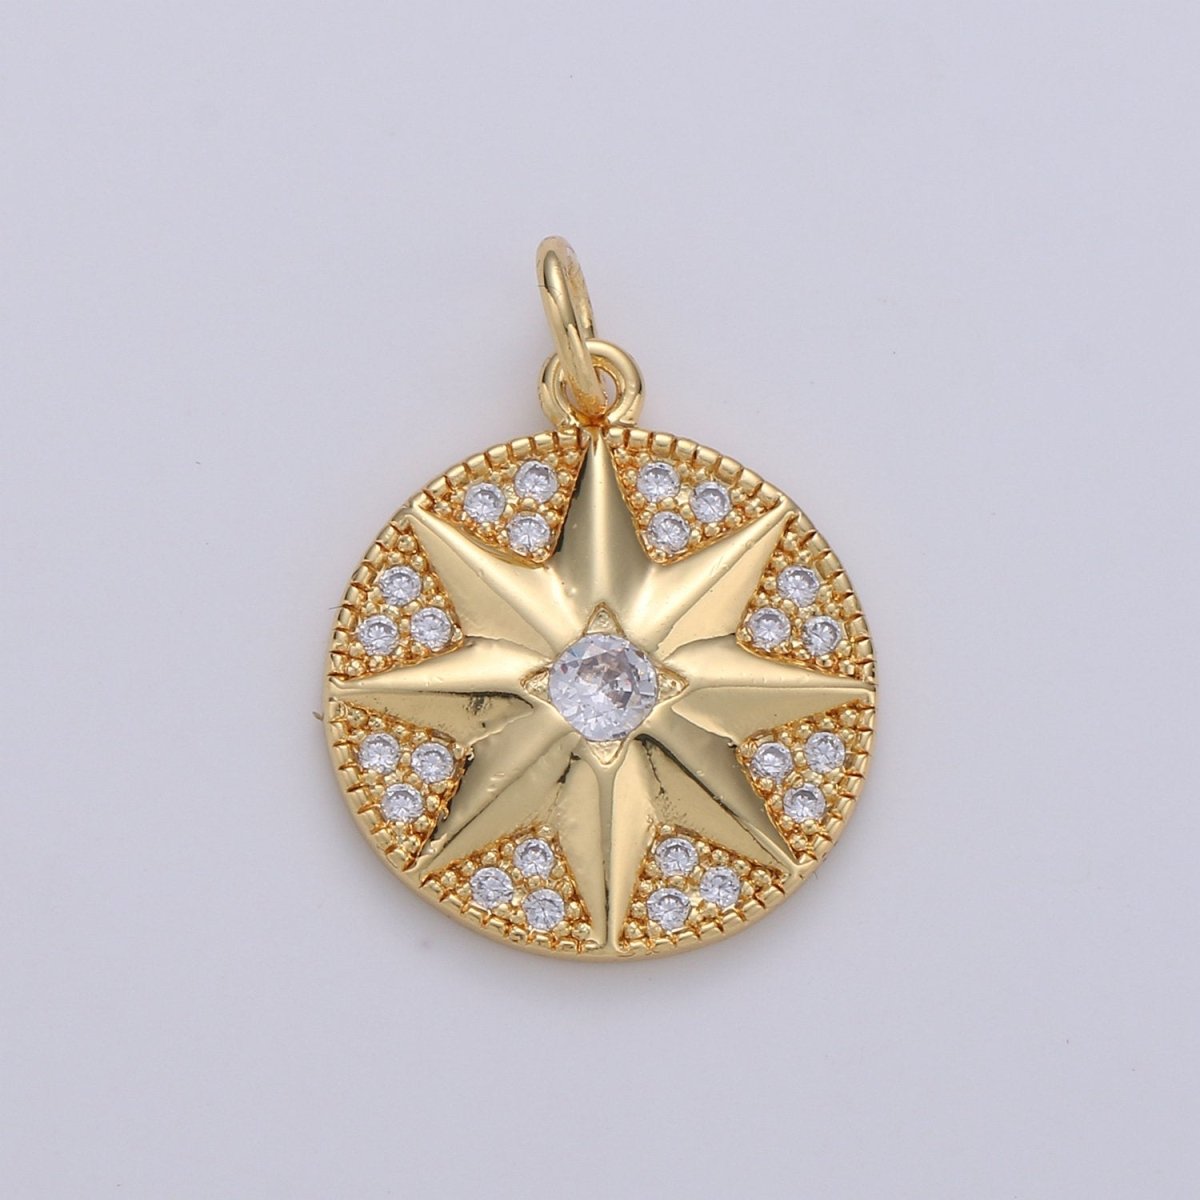 Dainty Gold North star Charm, starburst gold Pendant, dainty minimalist Jewelry Making in 24k Gold Filled Findings D-293 - DLUXCA